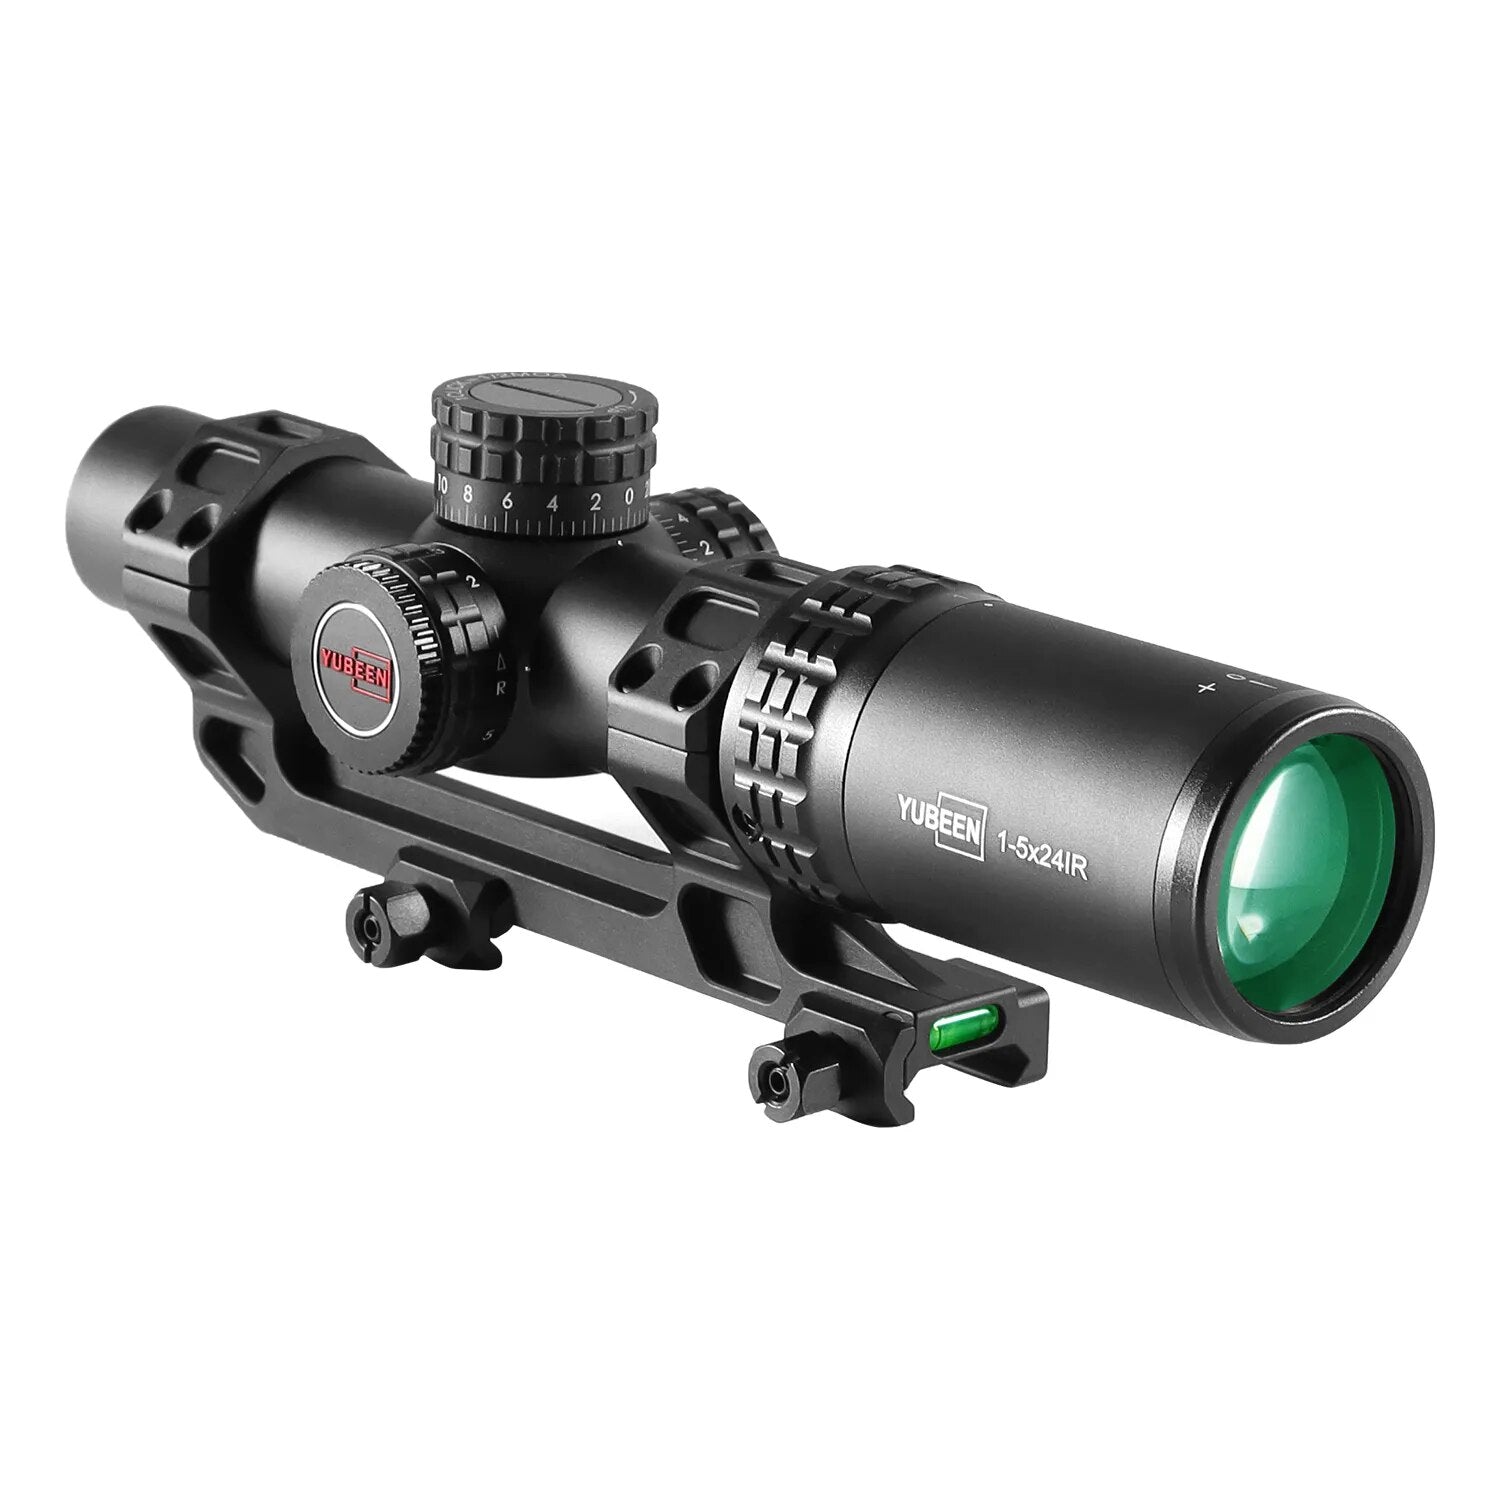 YUBEEN 1-5x24 IR Optical Red & Green Compact Hunting Scope